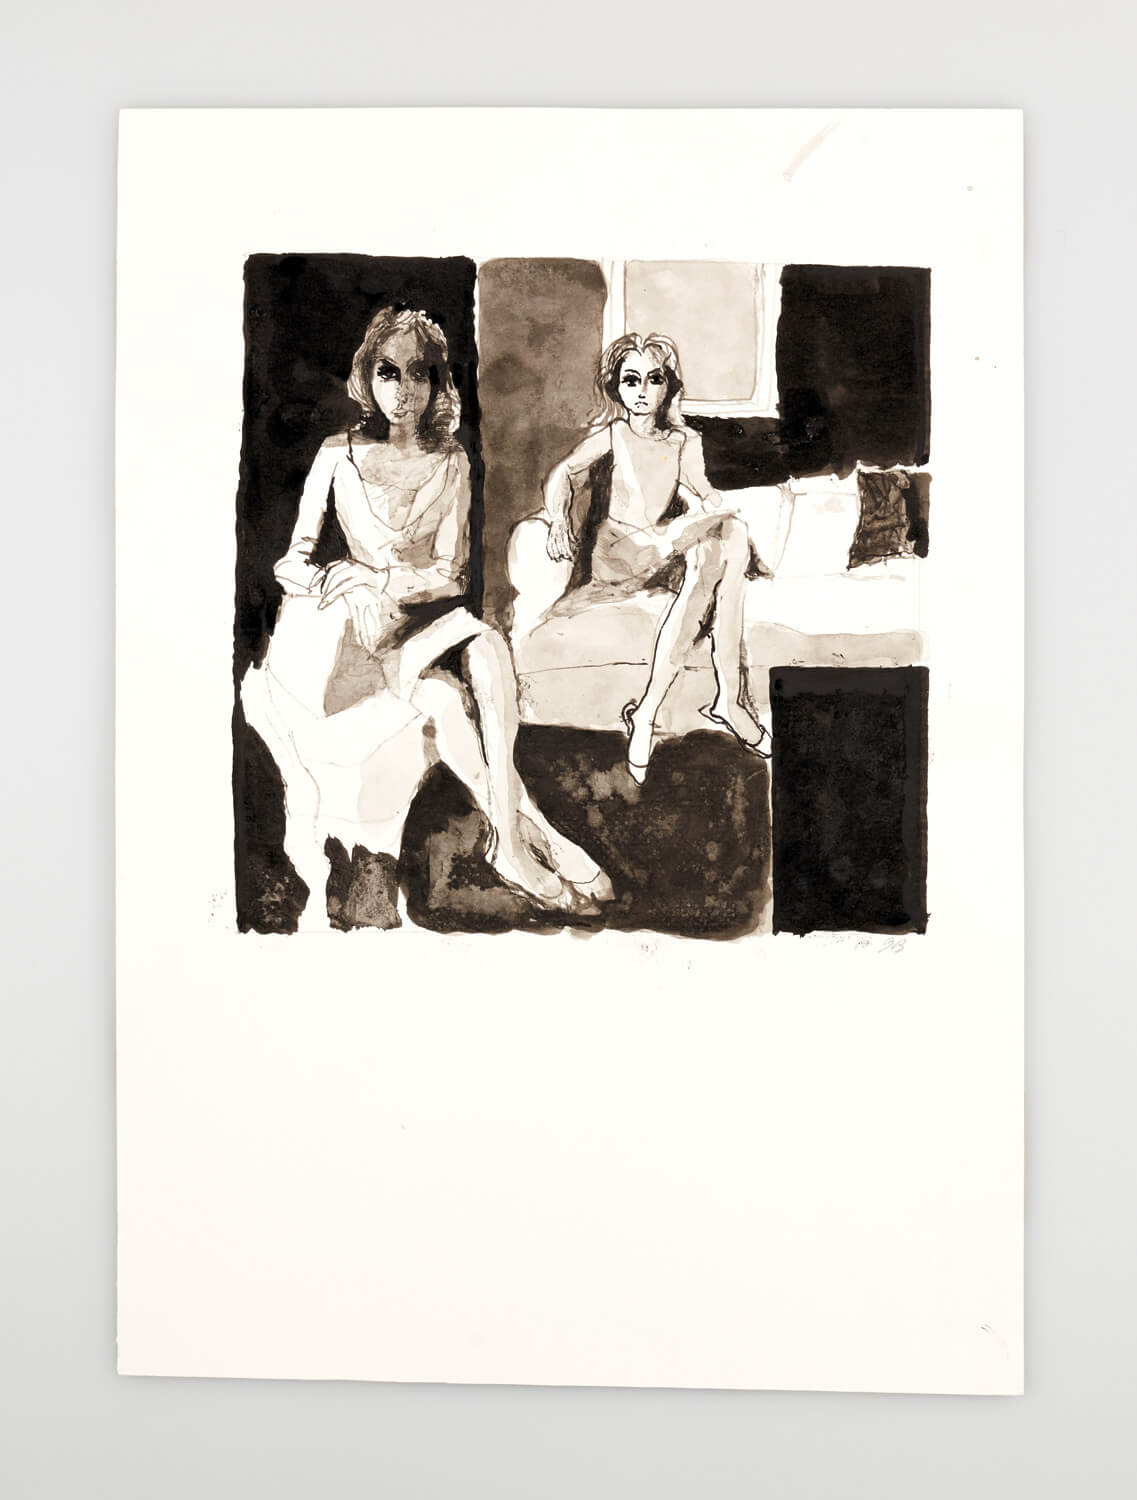 JB112 - Two Mannequins - 2000 - 26 x 27 cm - Indian ink and wash on paper